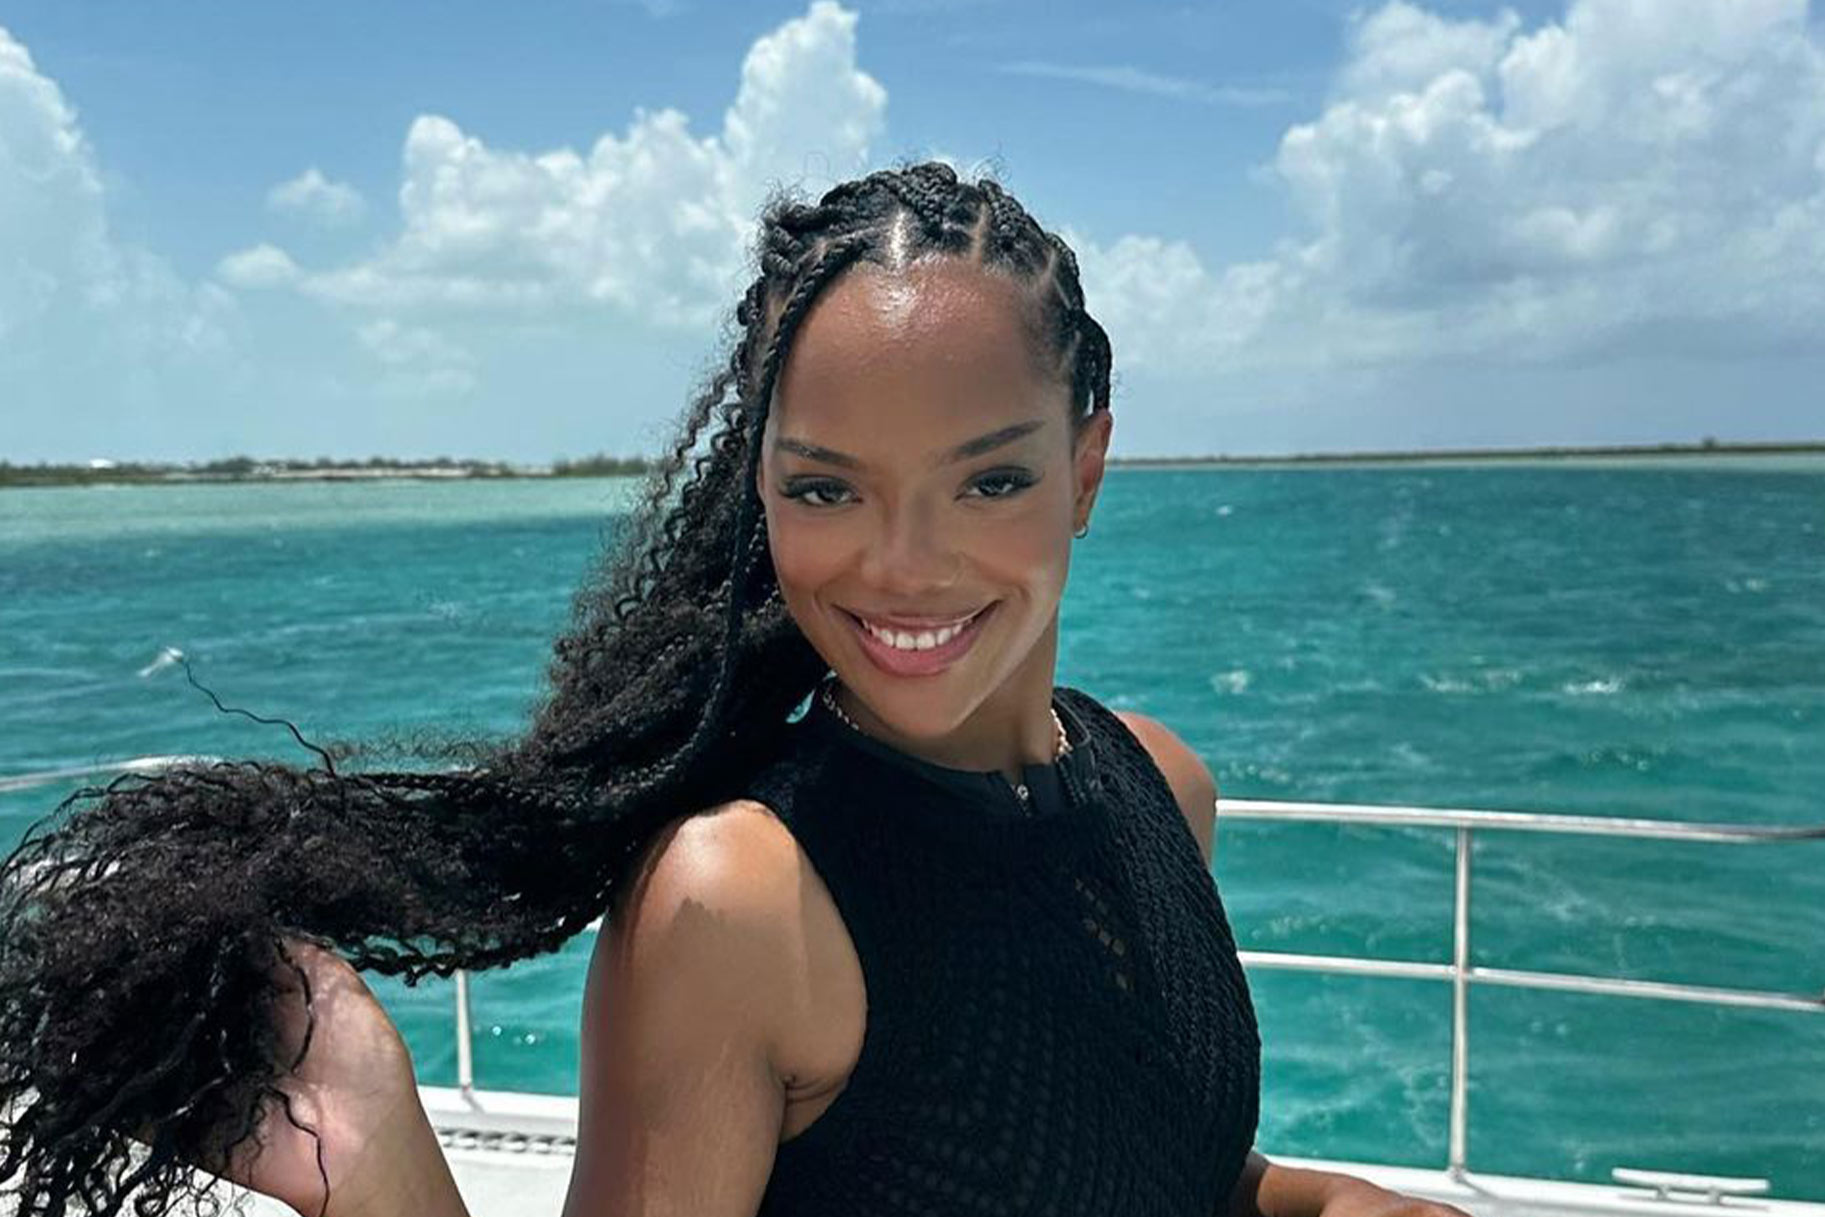 Riley Burruss with braids and a black outfit smiling on a boat.